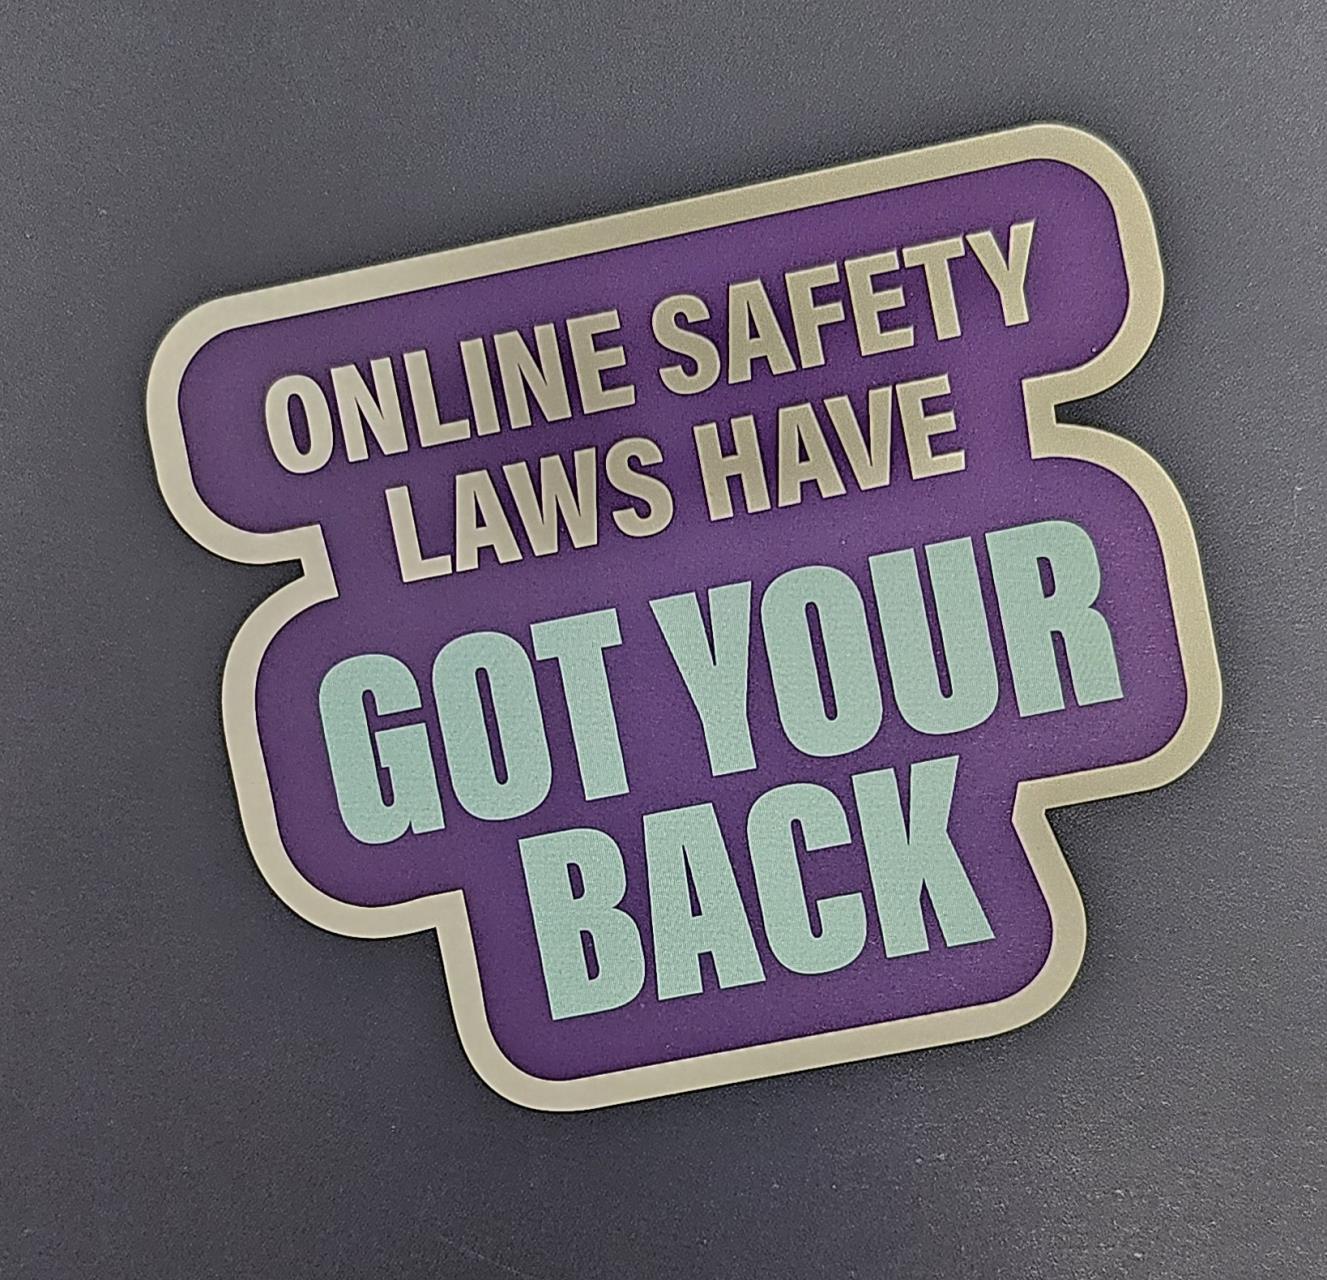 Online Safety Campaign